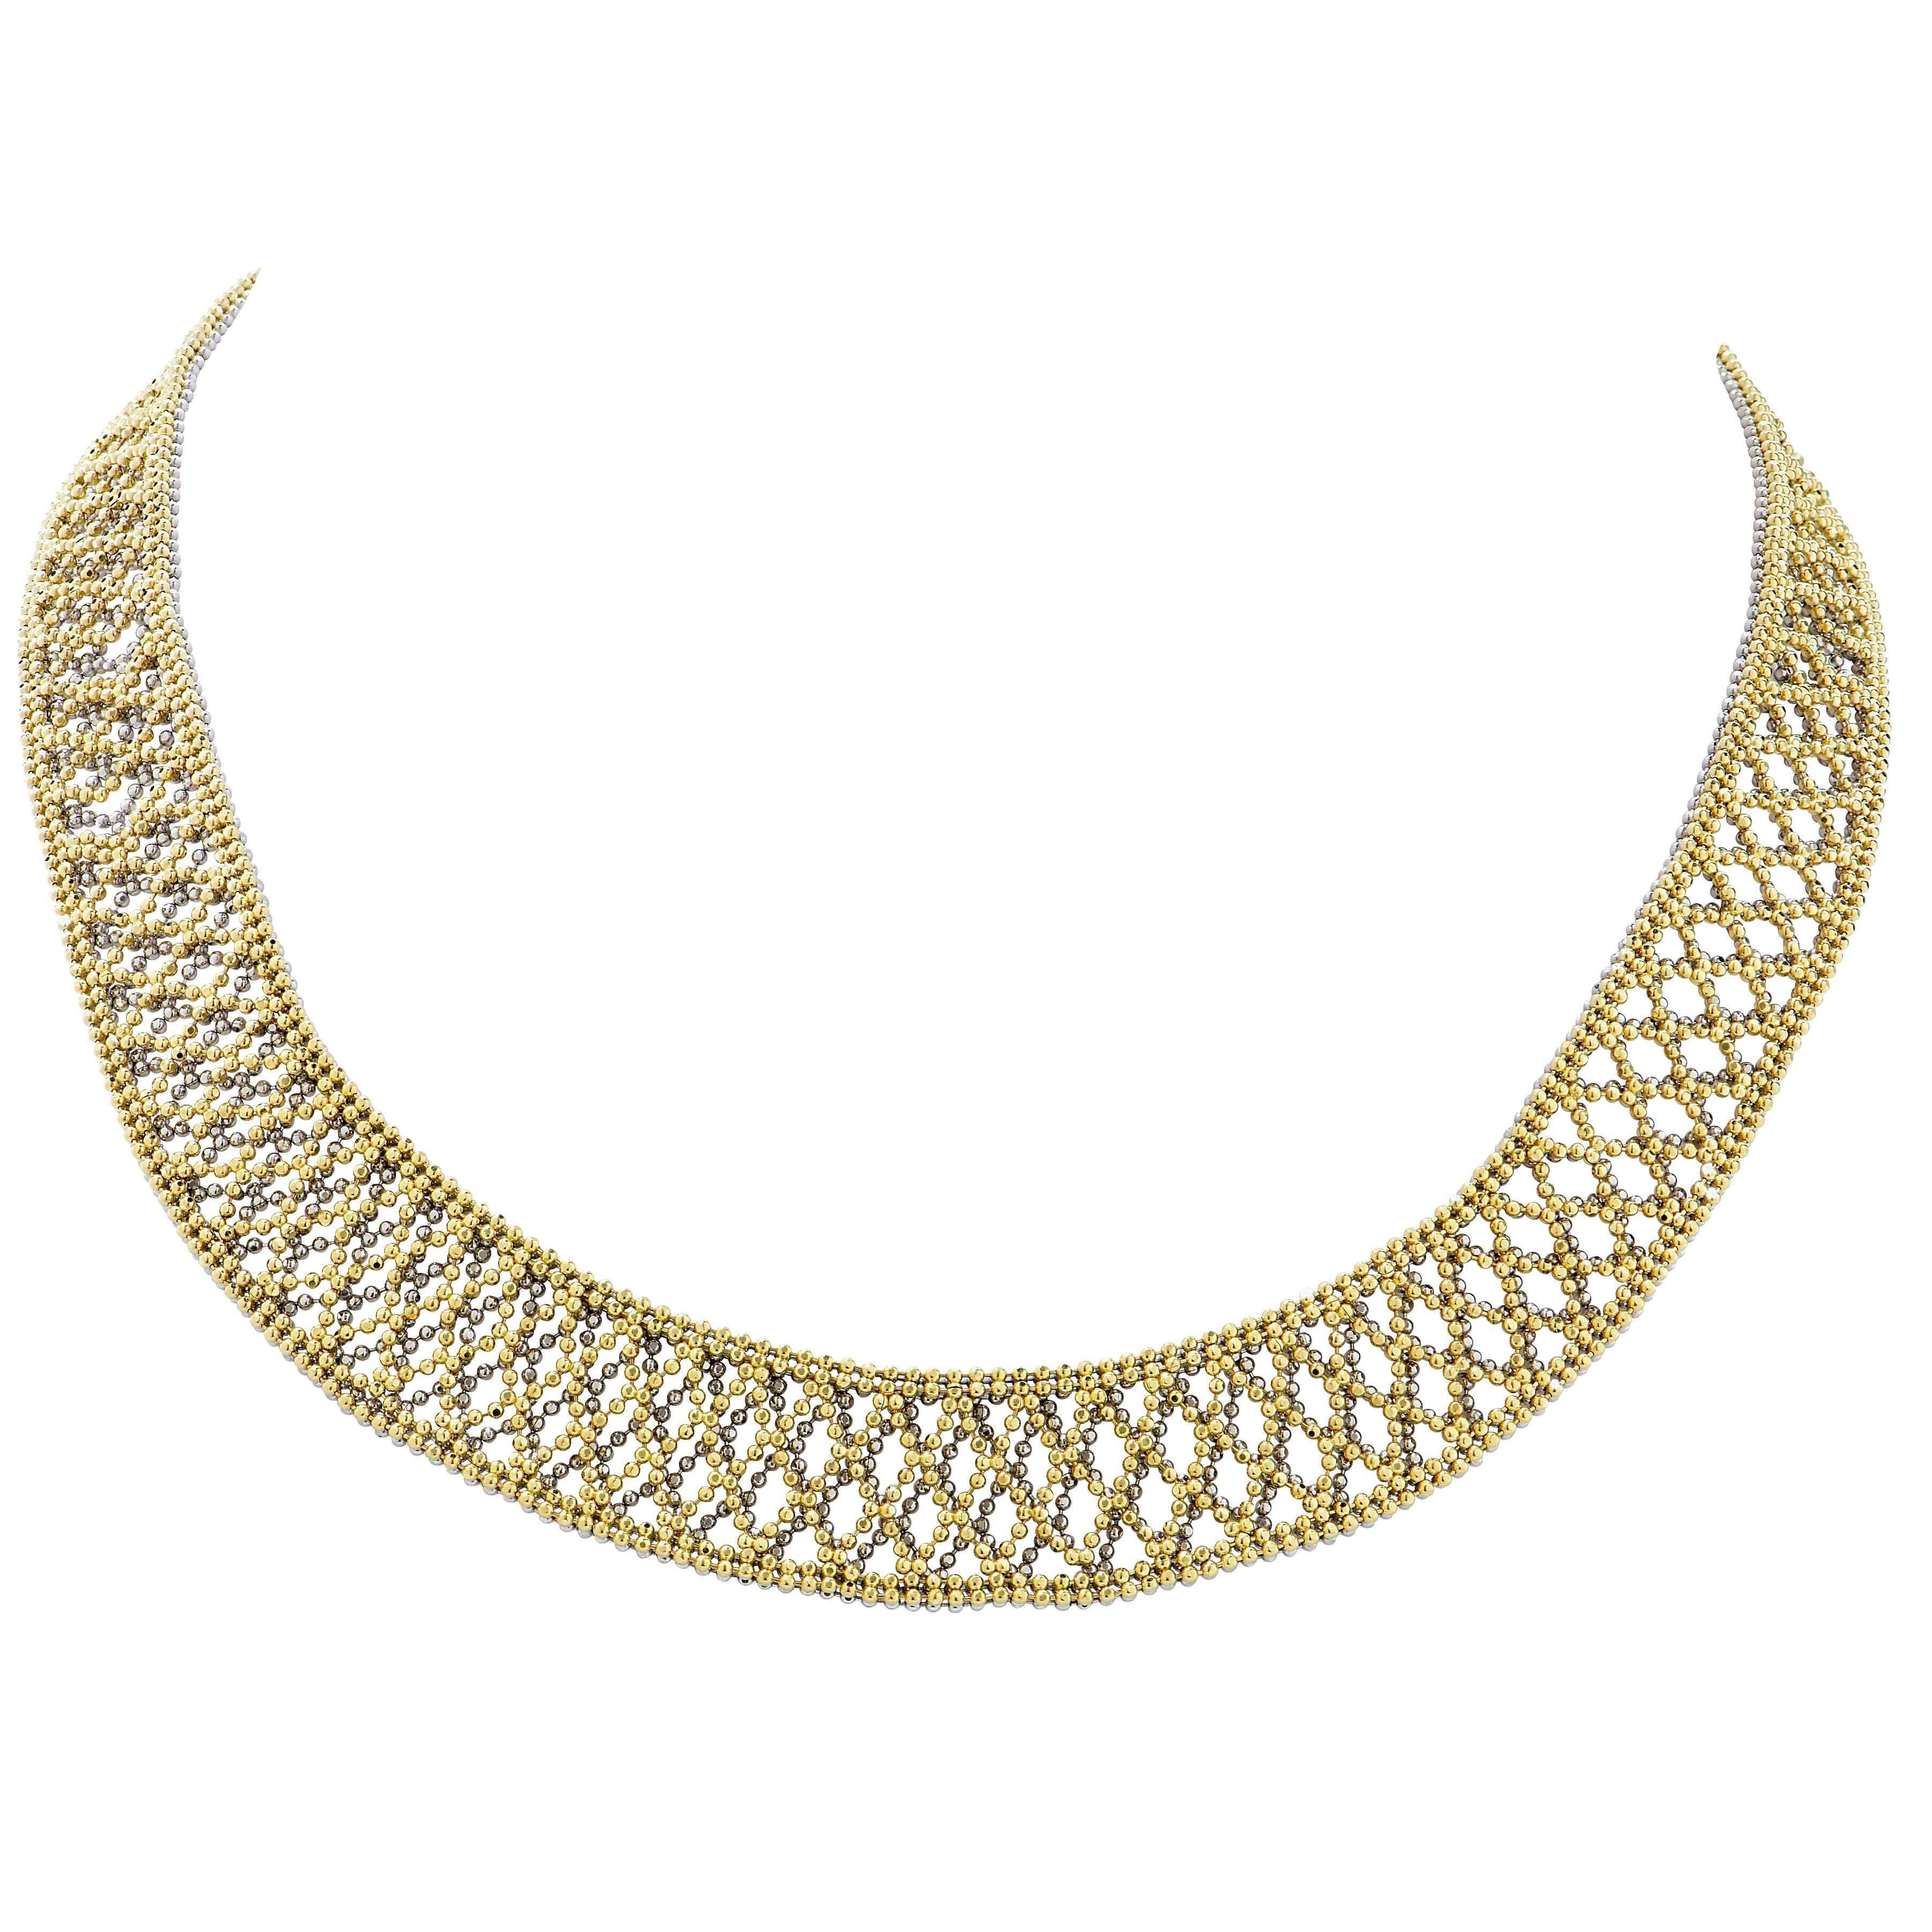 This beautifully crafted bead work open lattice necklace features two layers of beads giving the necklace depth the mixture of white and yellow beads.
Necklace Length: 15 Inches
Metal Type: Platinum and 18 Karat Yellow Gold
Metal Weight: 34.6 Grams